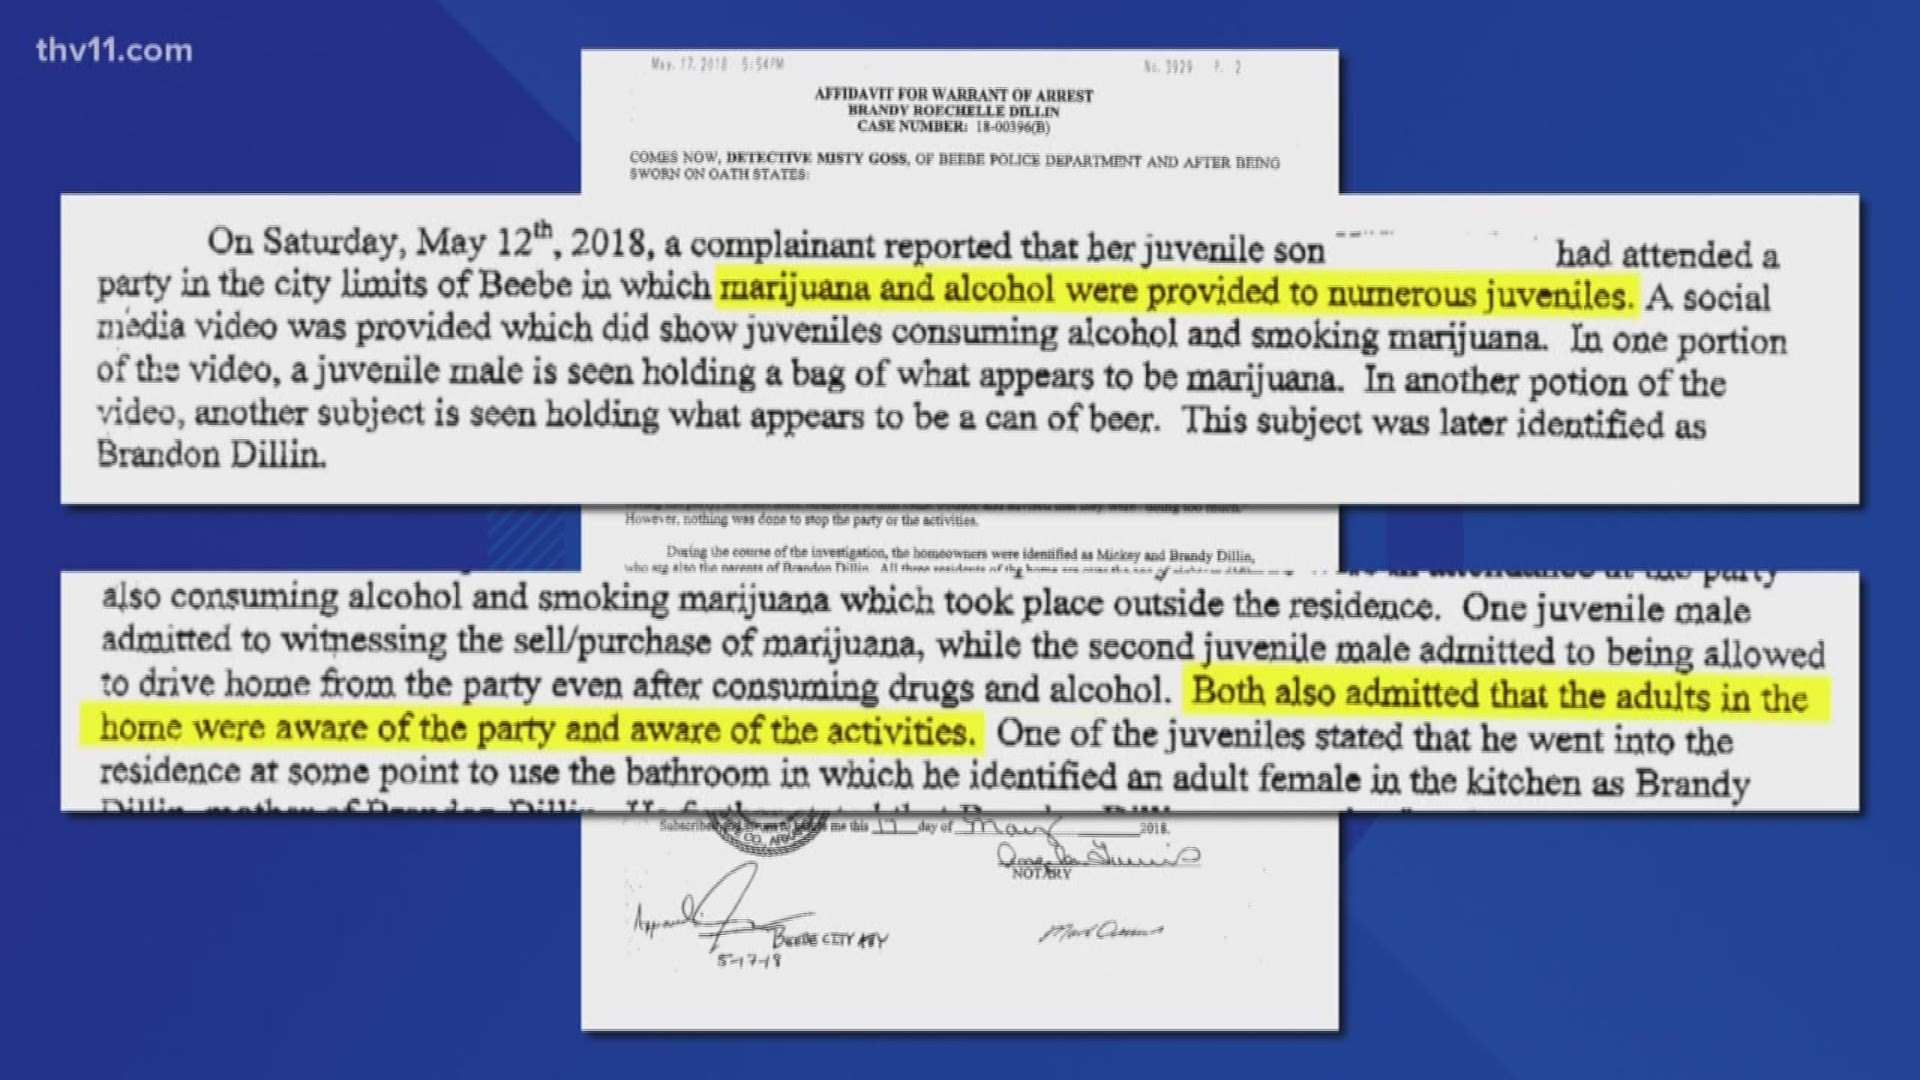 The superintendent, her husband and her son were arrested for having a house party where minors were drinking and smoking marijuana.